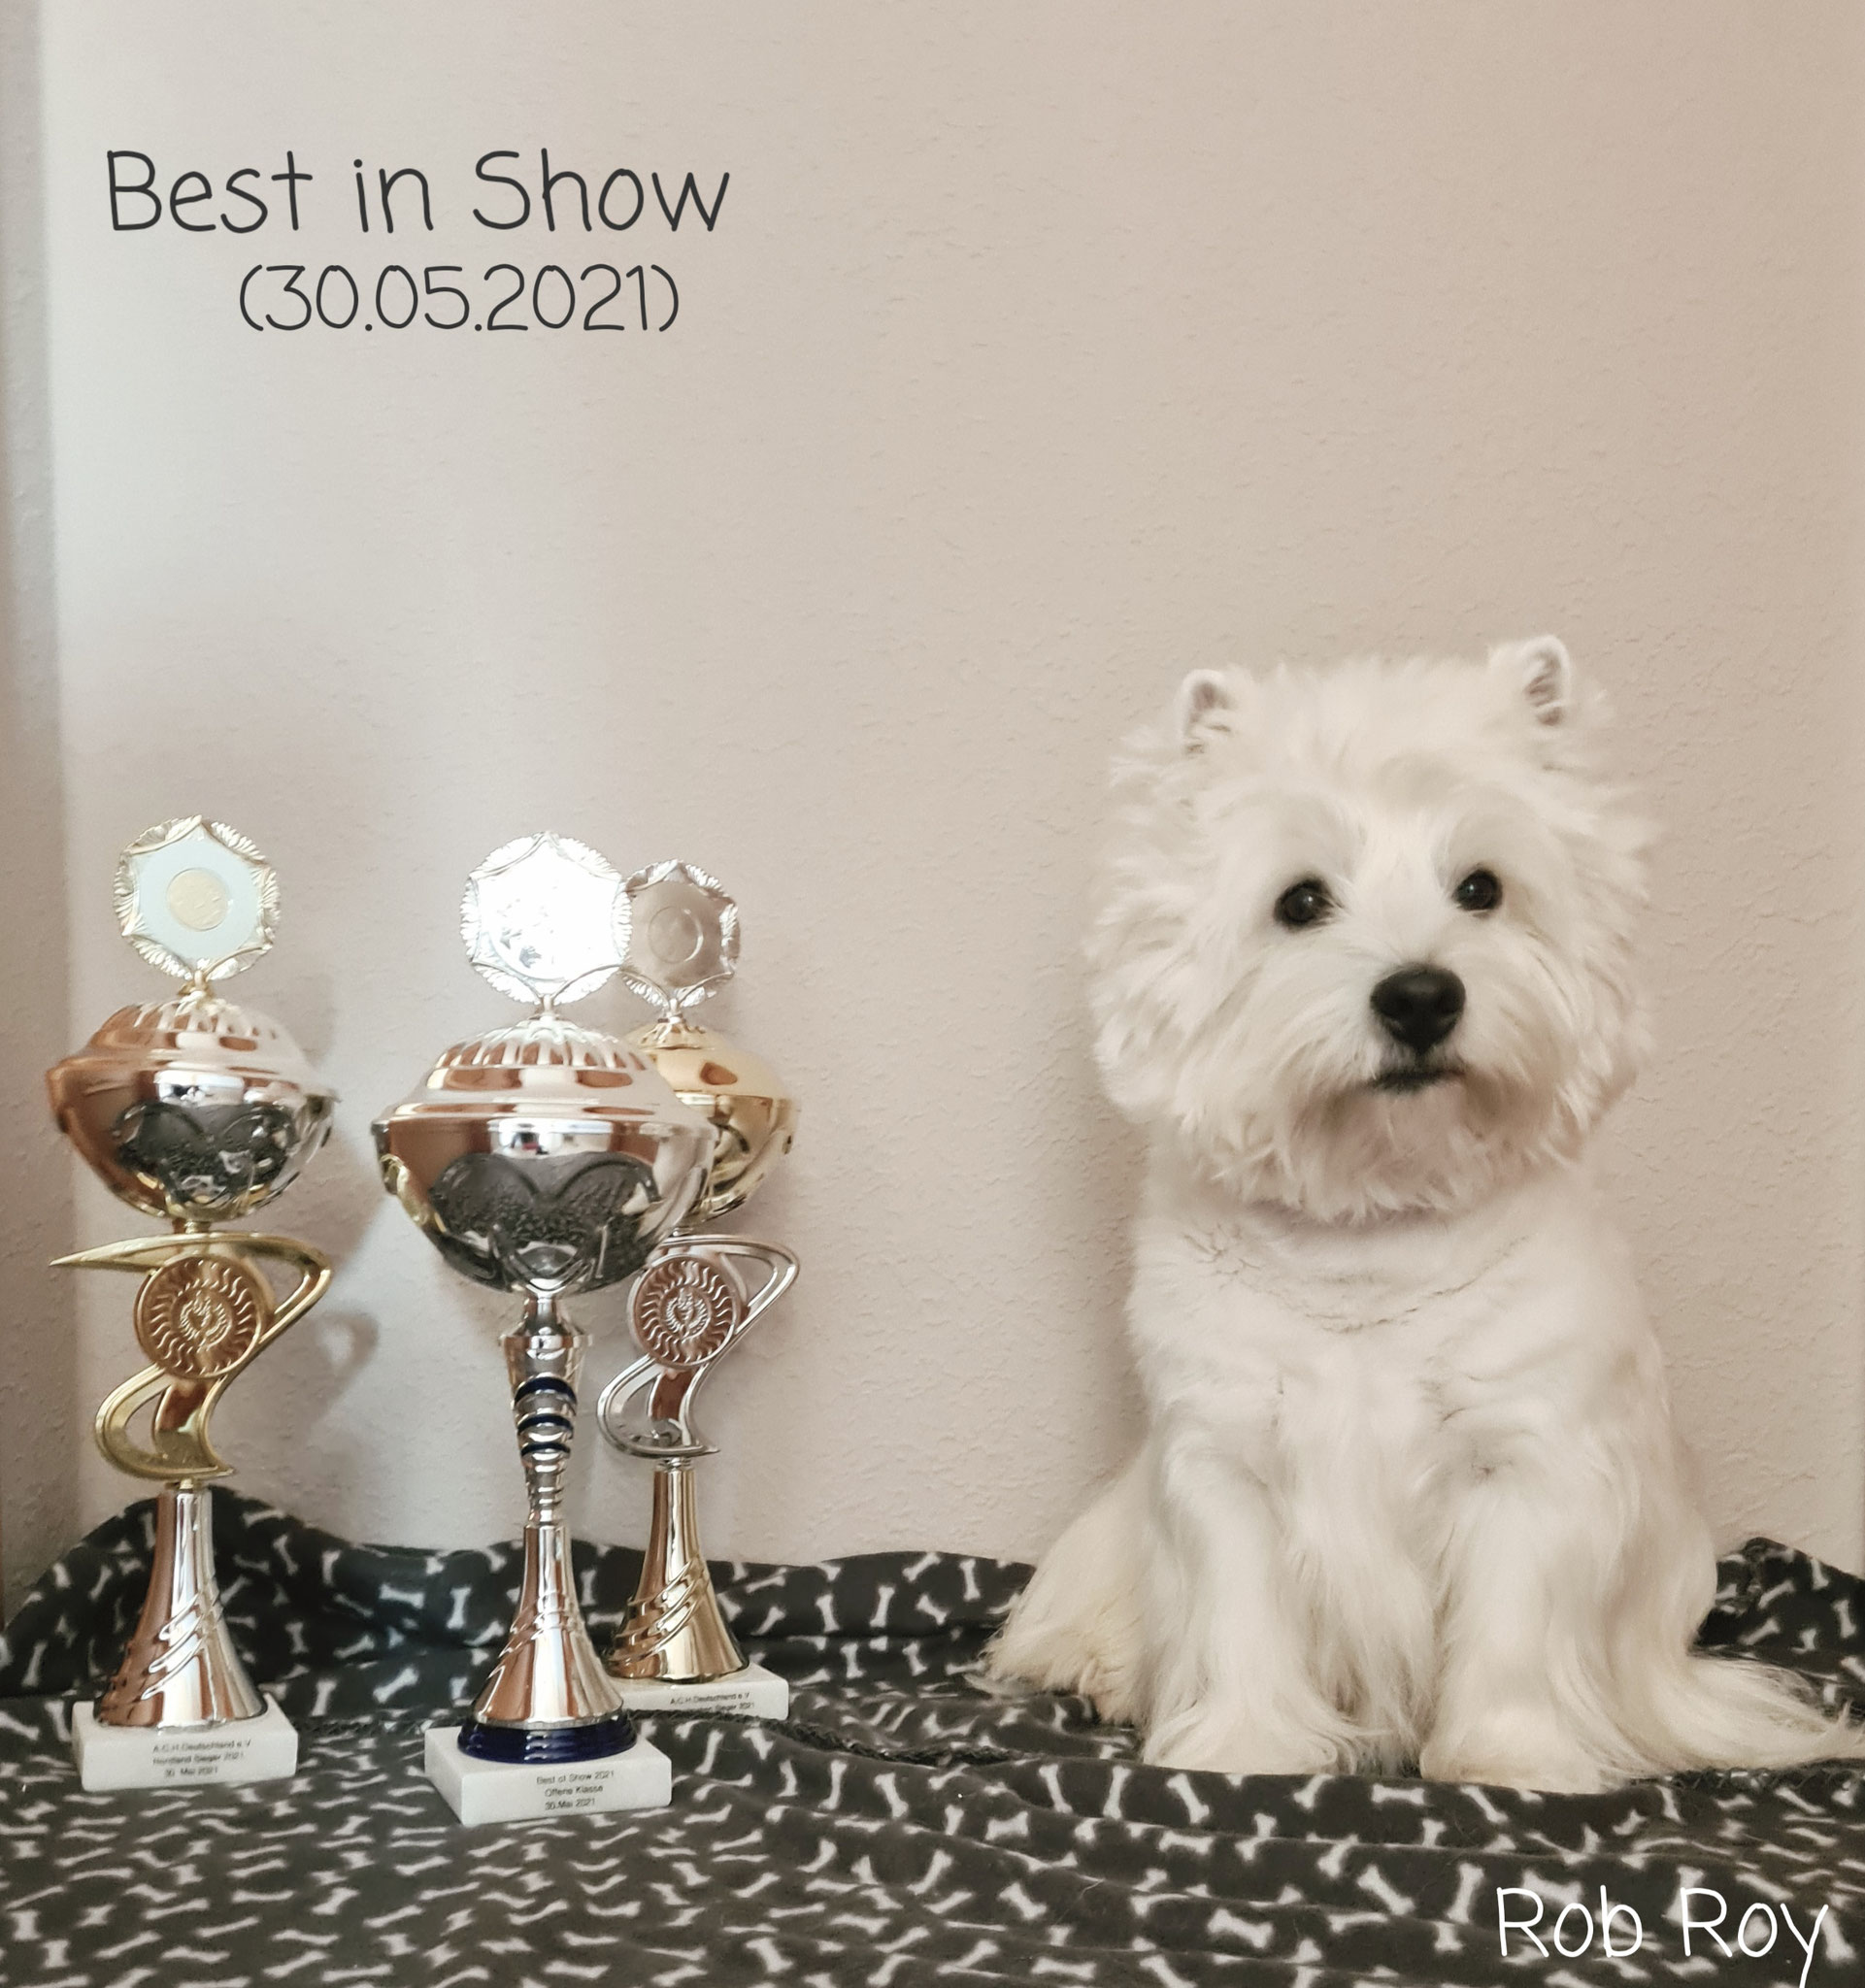 Rob Roy "Best in Show" 30.05.2021